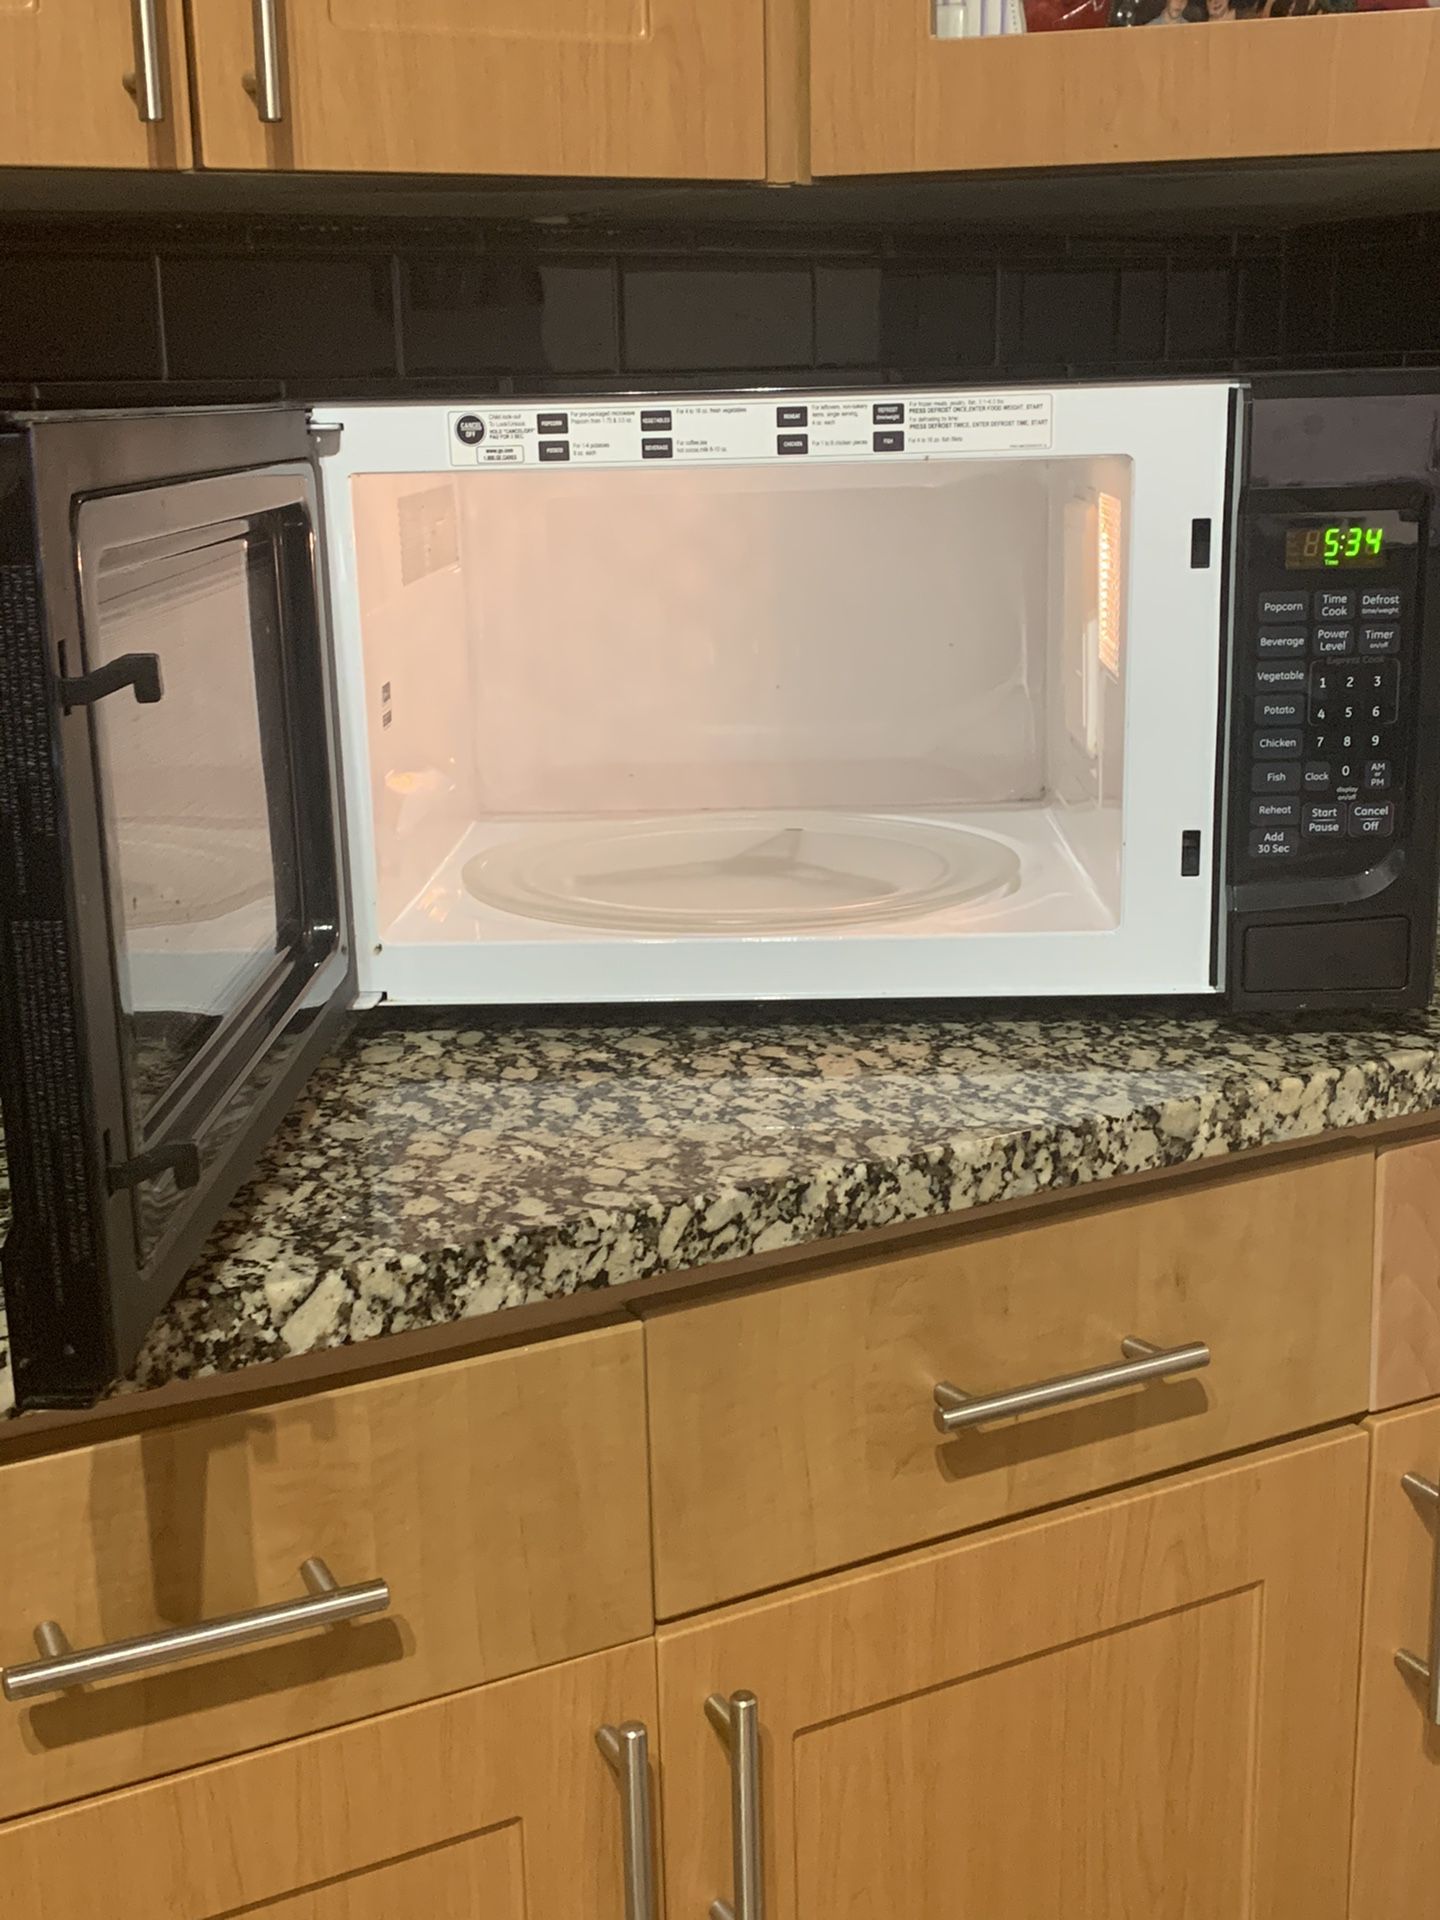 Black General Electric Countertop Microwave Oven